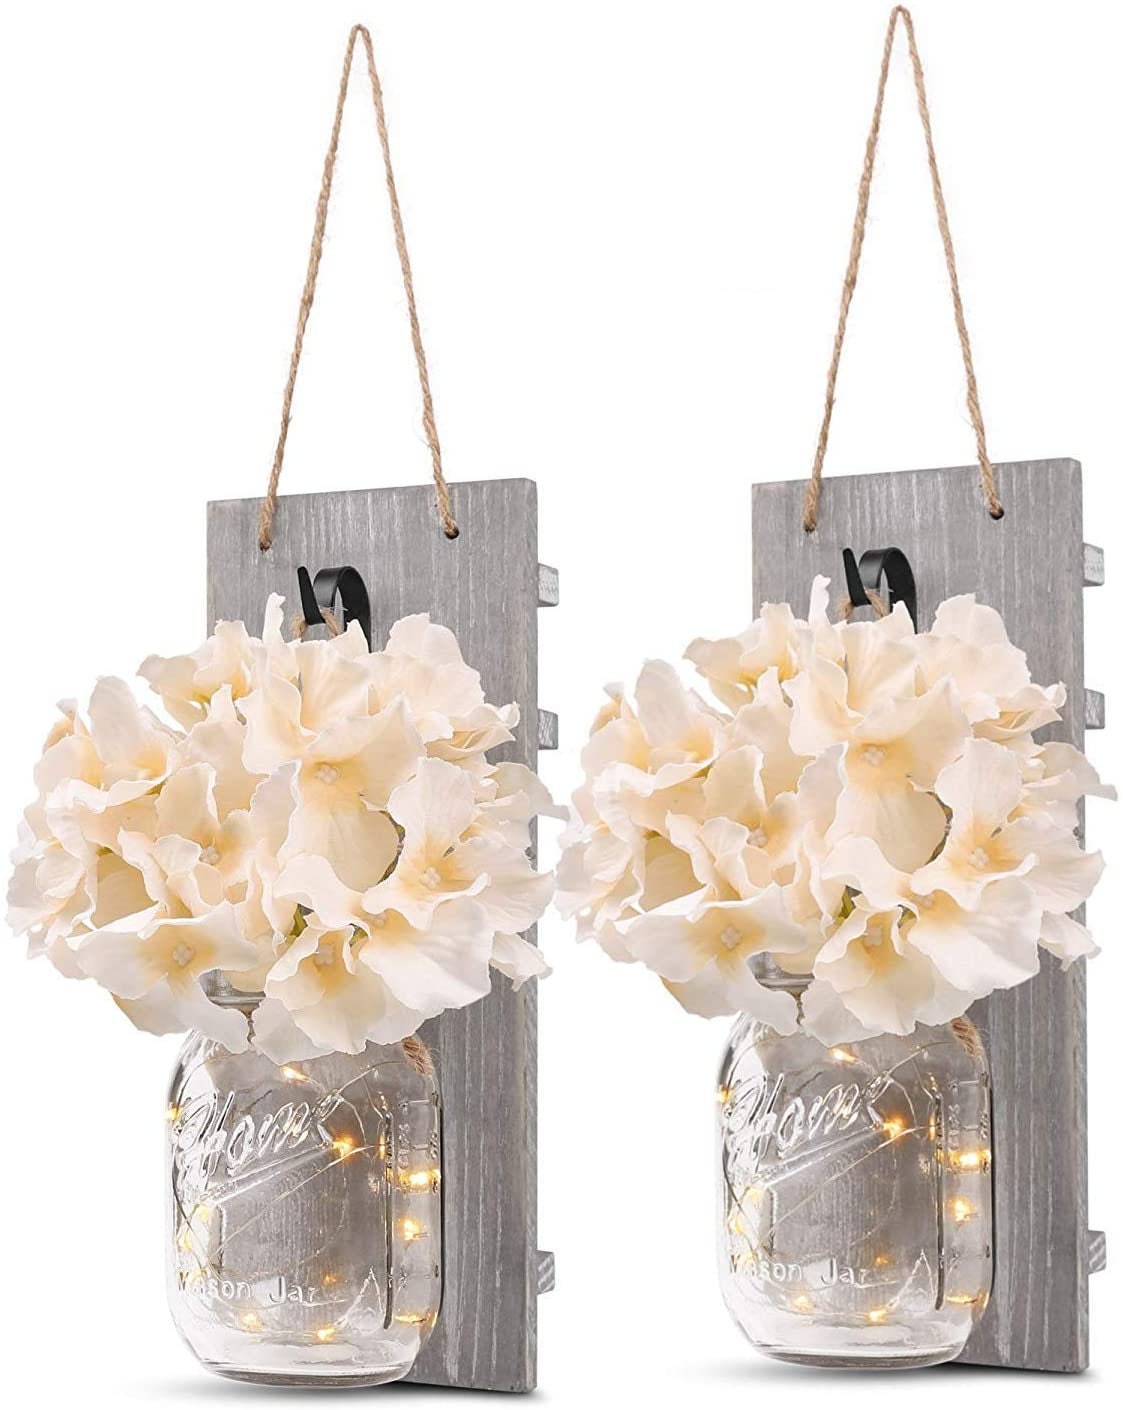 Set of 2 - Rustic Wall Sconces - Mason Jars Sconce with Wrought Iron Hooks, Flowers, LED Fairy Lights for Home Wall Decoration Gift